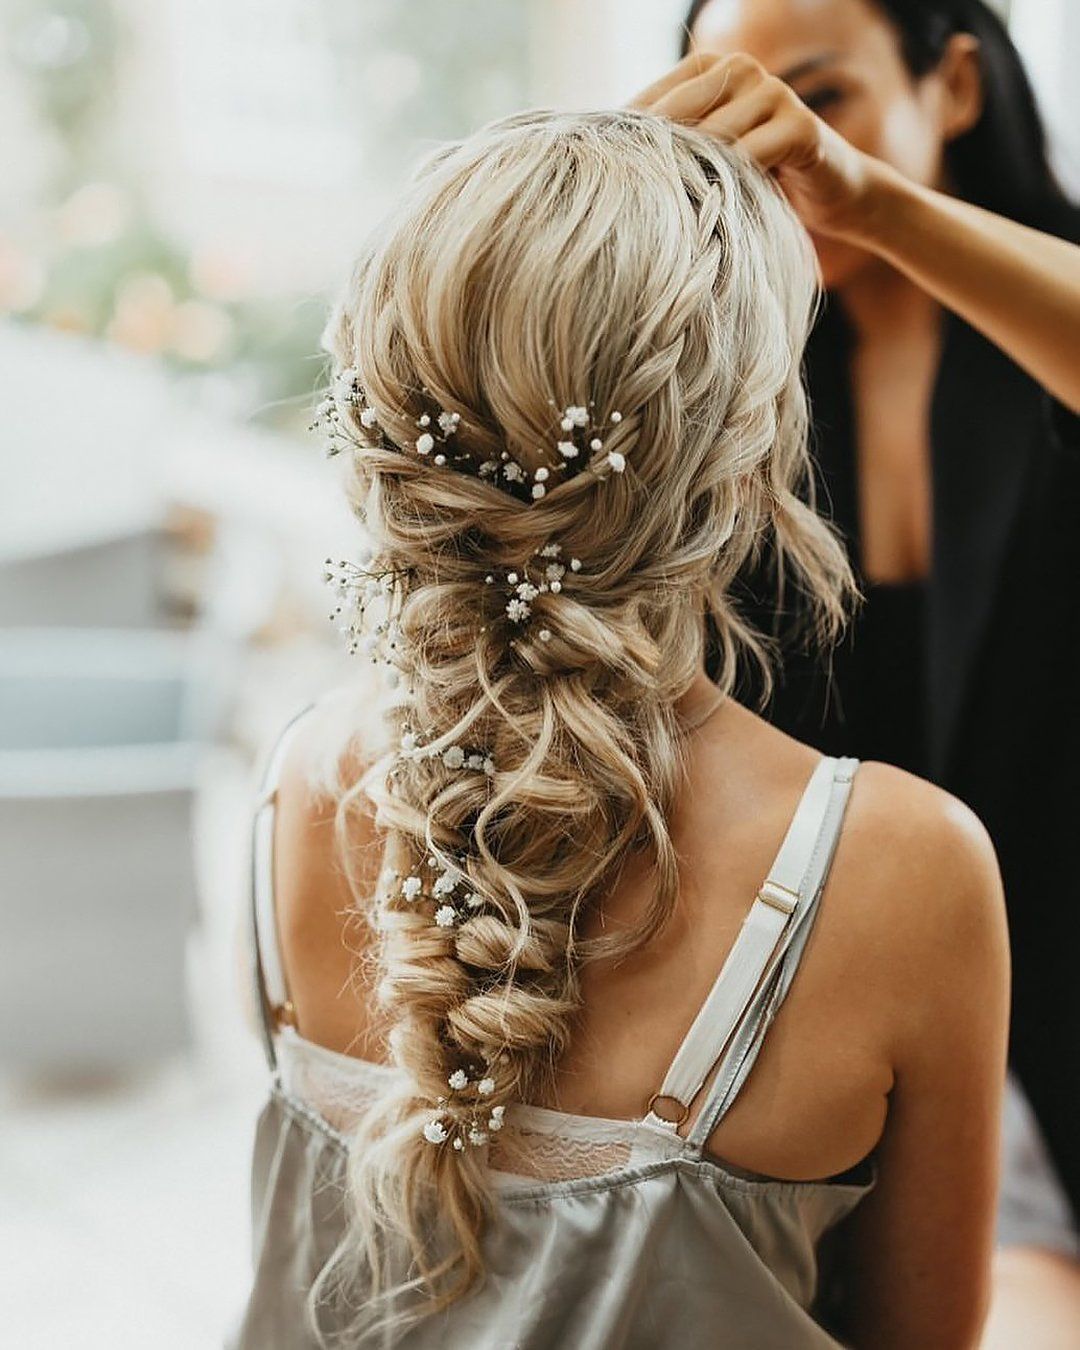 Stunning Wedding Hair Ideas for the Perfect Bridal Look